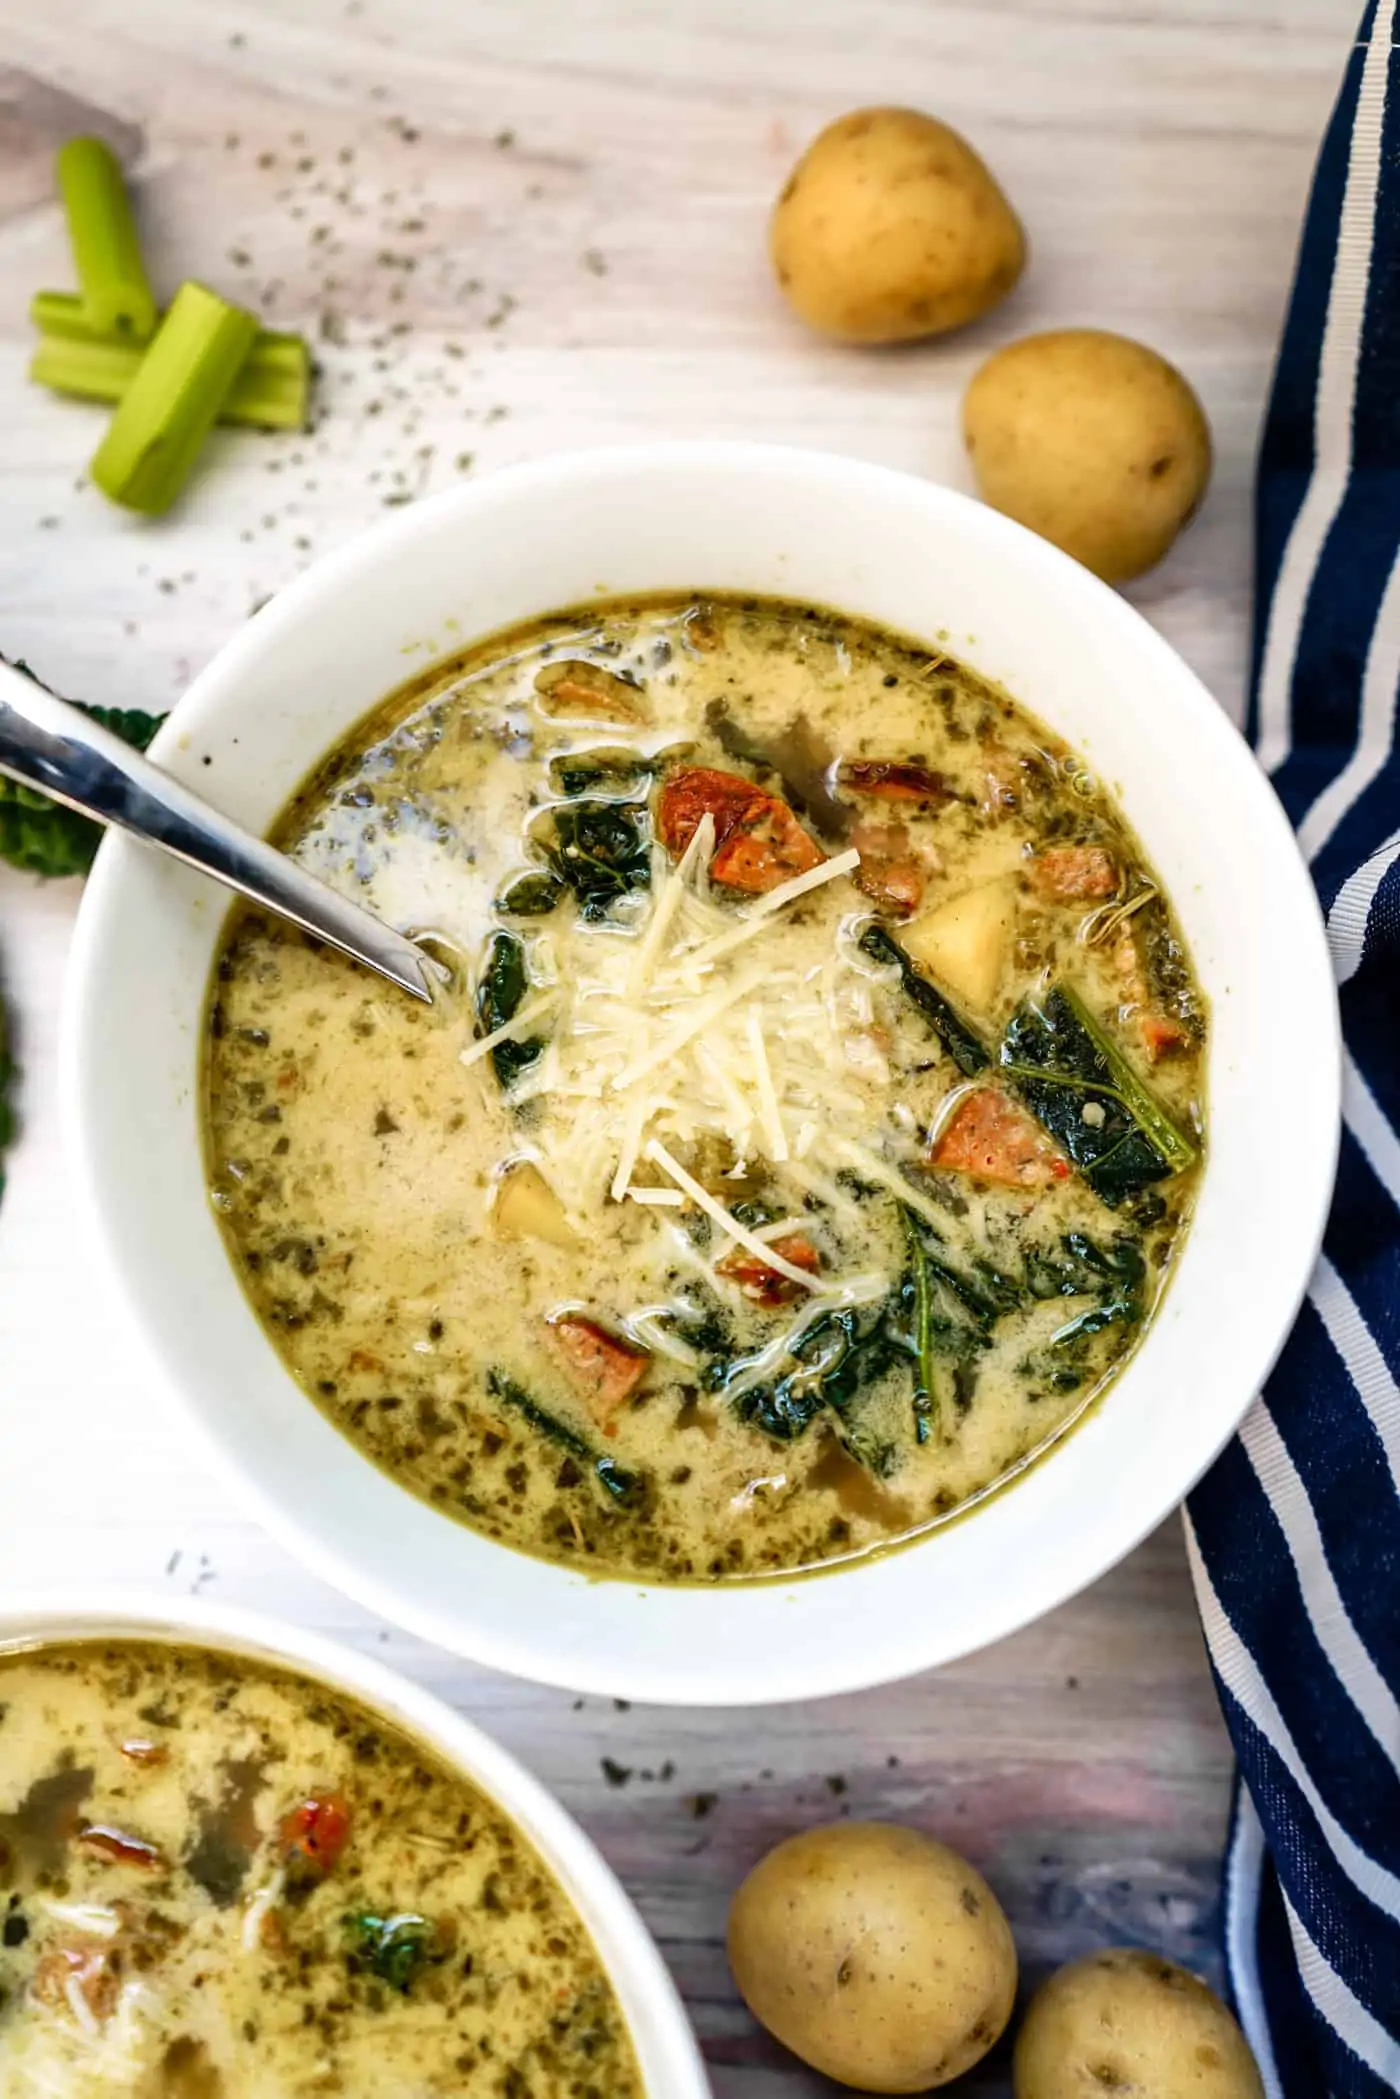 A Lily Love Affair shares an easy recipe for Instant Pot Zuppa Toscana soup with kale and parmesan cheese